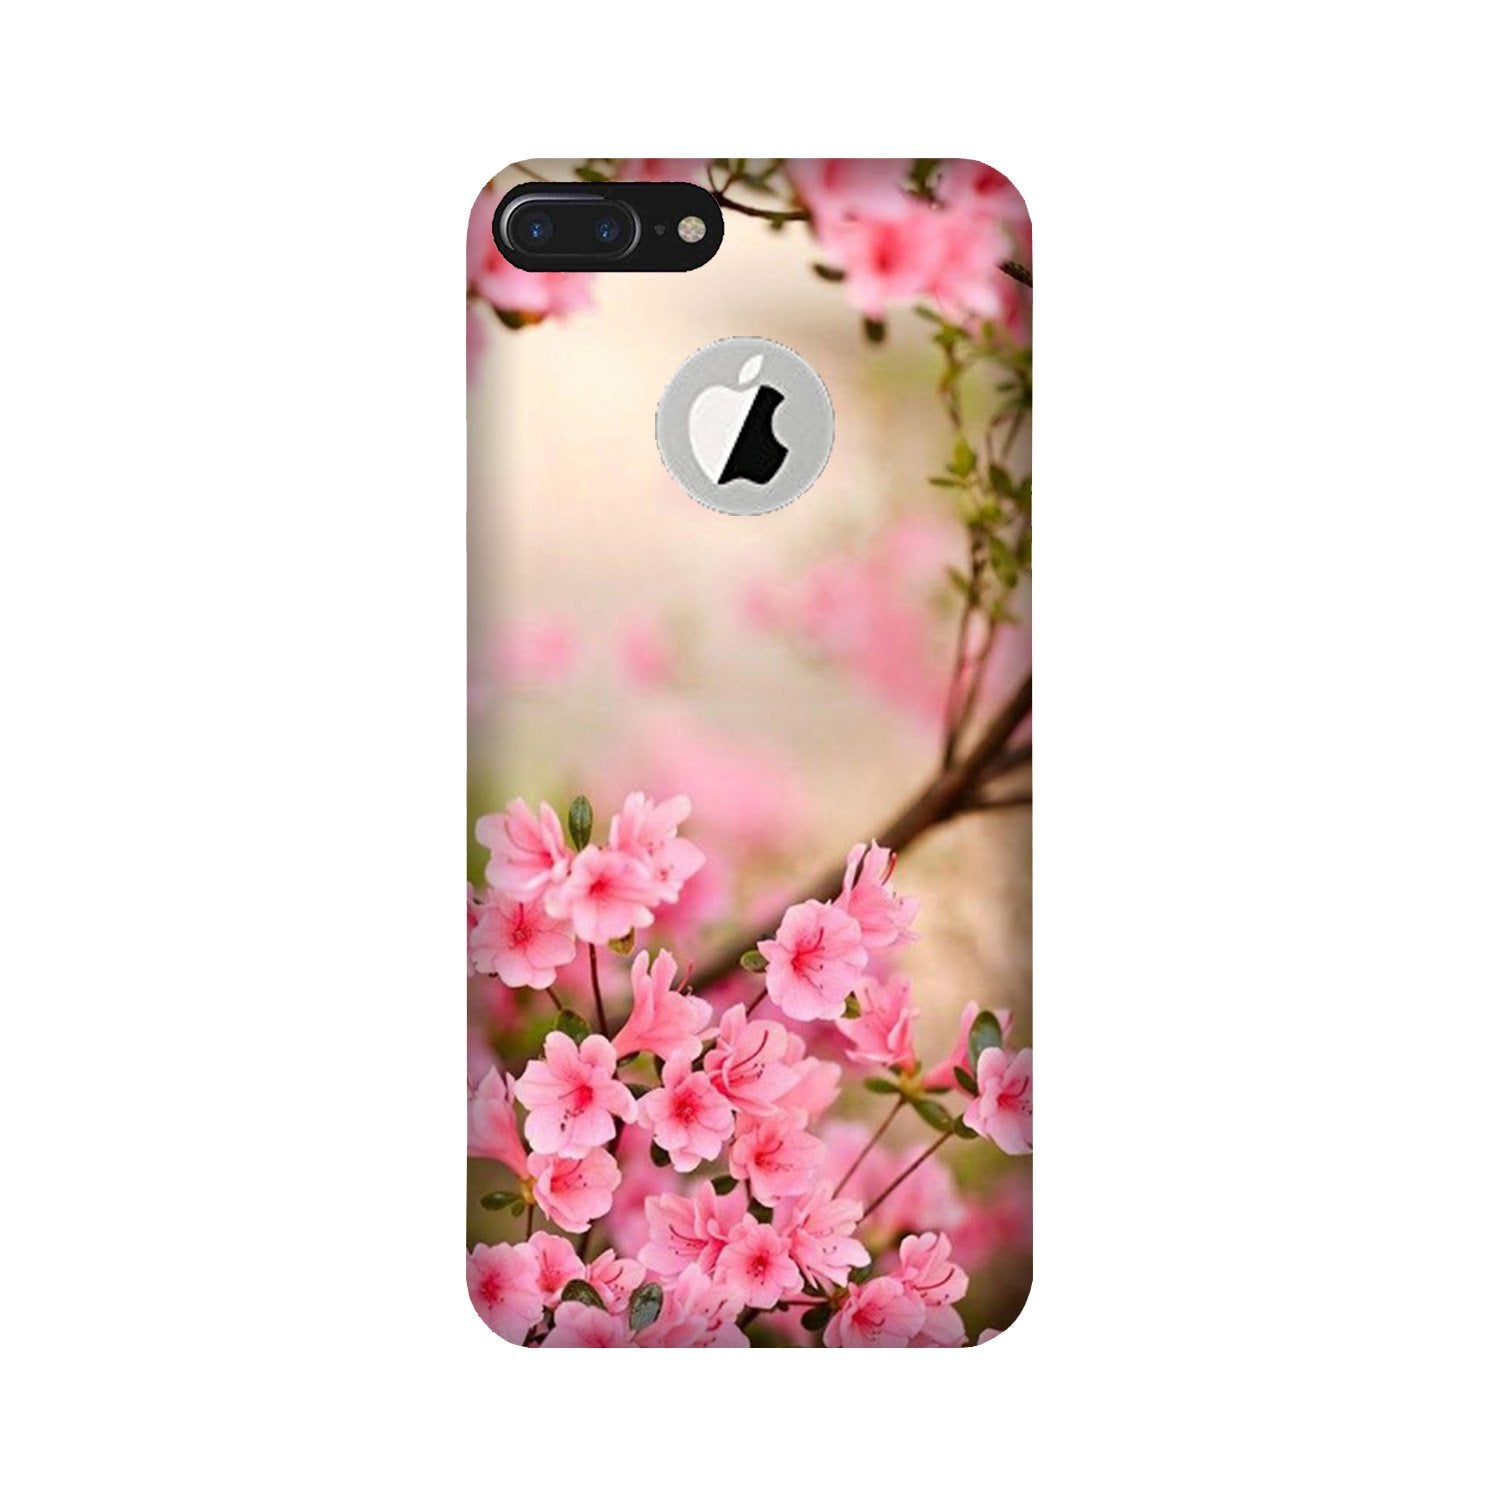 Pink flowers Case for iPhone 7 Plus logo cut